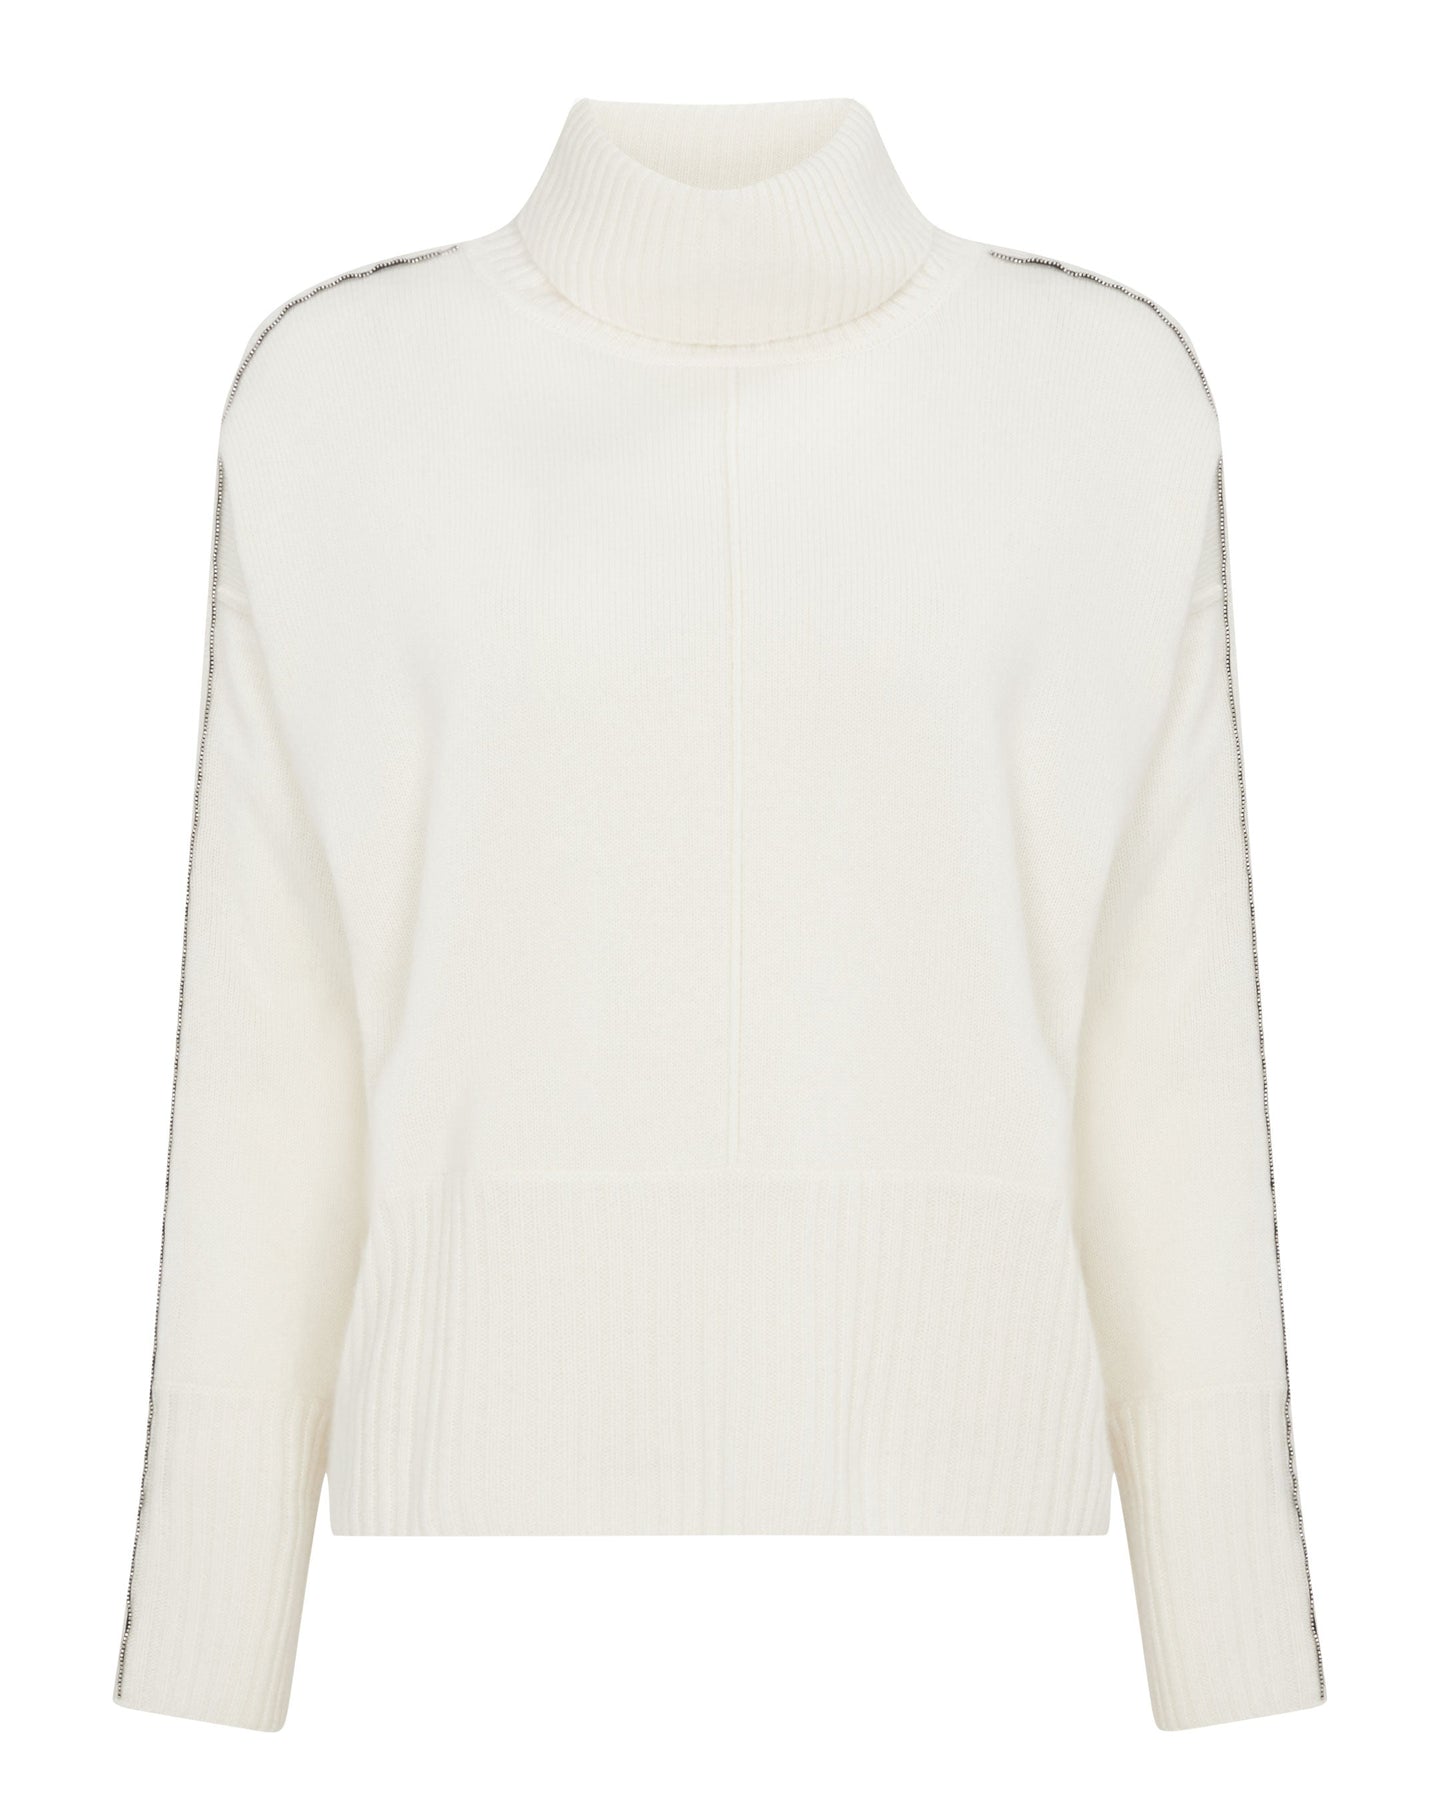 N.Peal Women's Metal Trim Cashmere Jumper New Ivory White